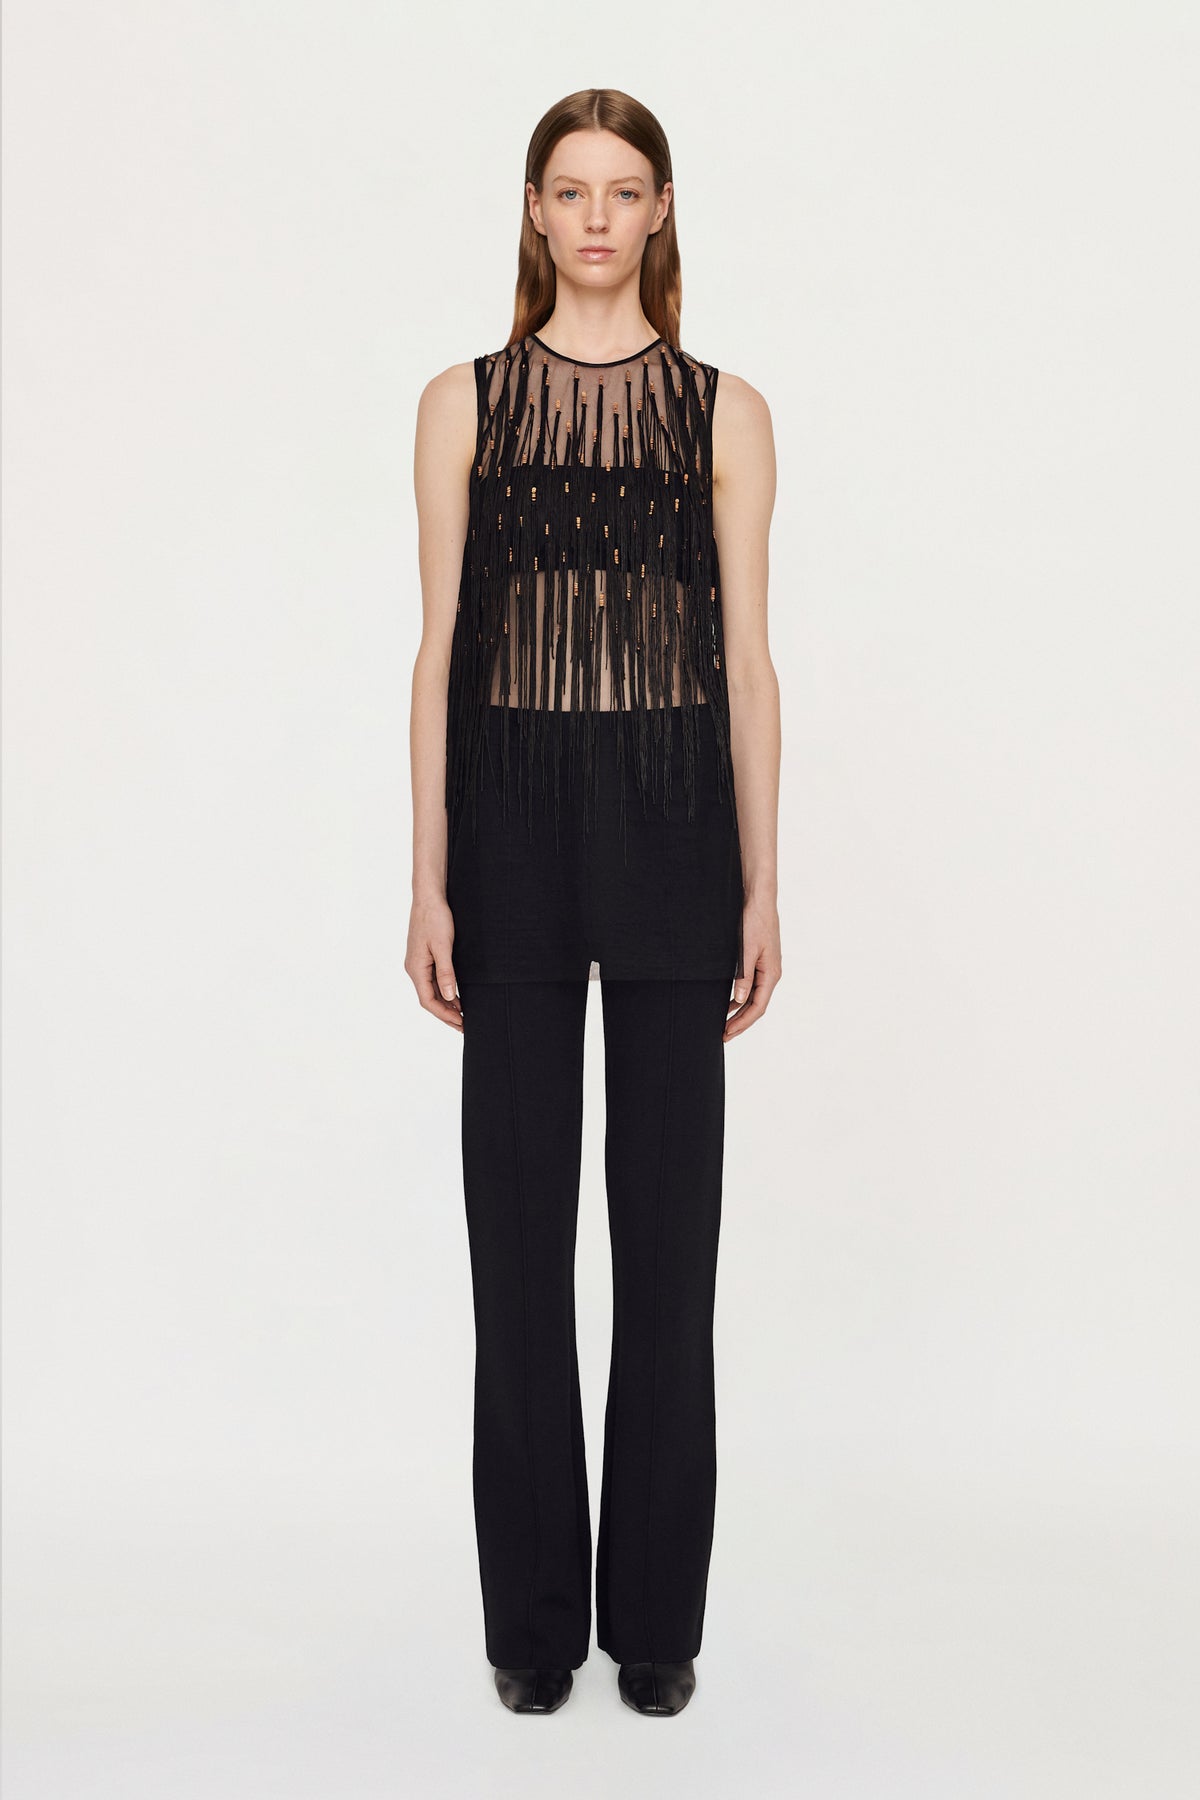 Clea Amie Beaded Tunic in Black Fringe available at TNT The New Trend Australia. Free shipping on orders over $300 AUD.